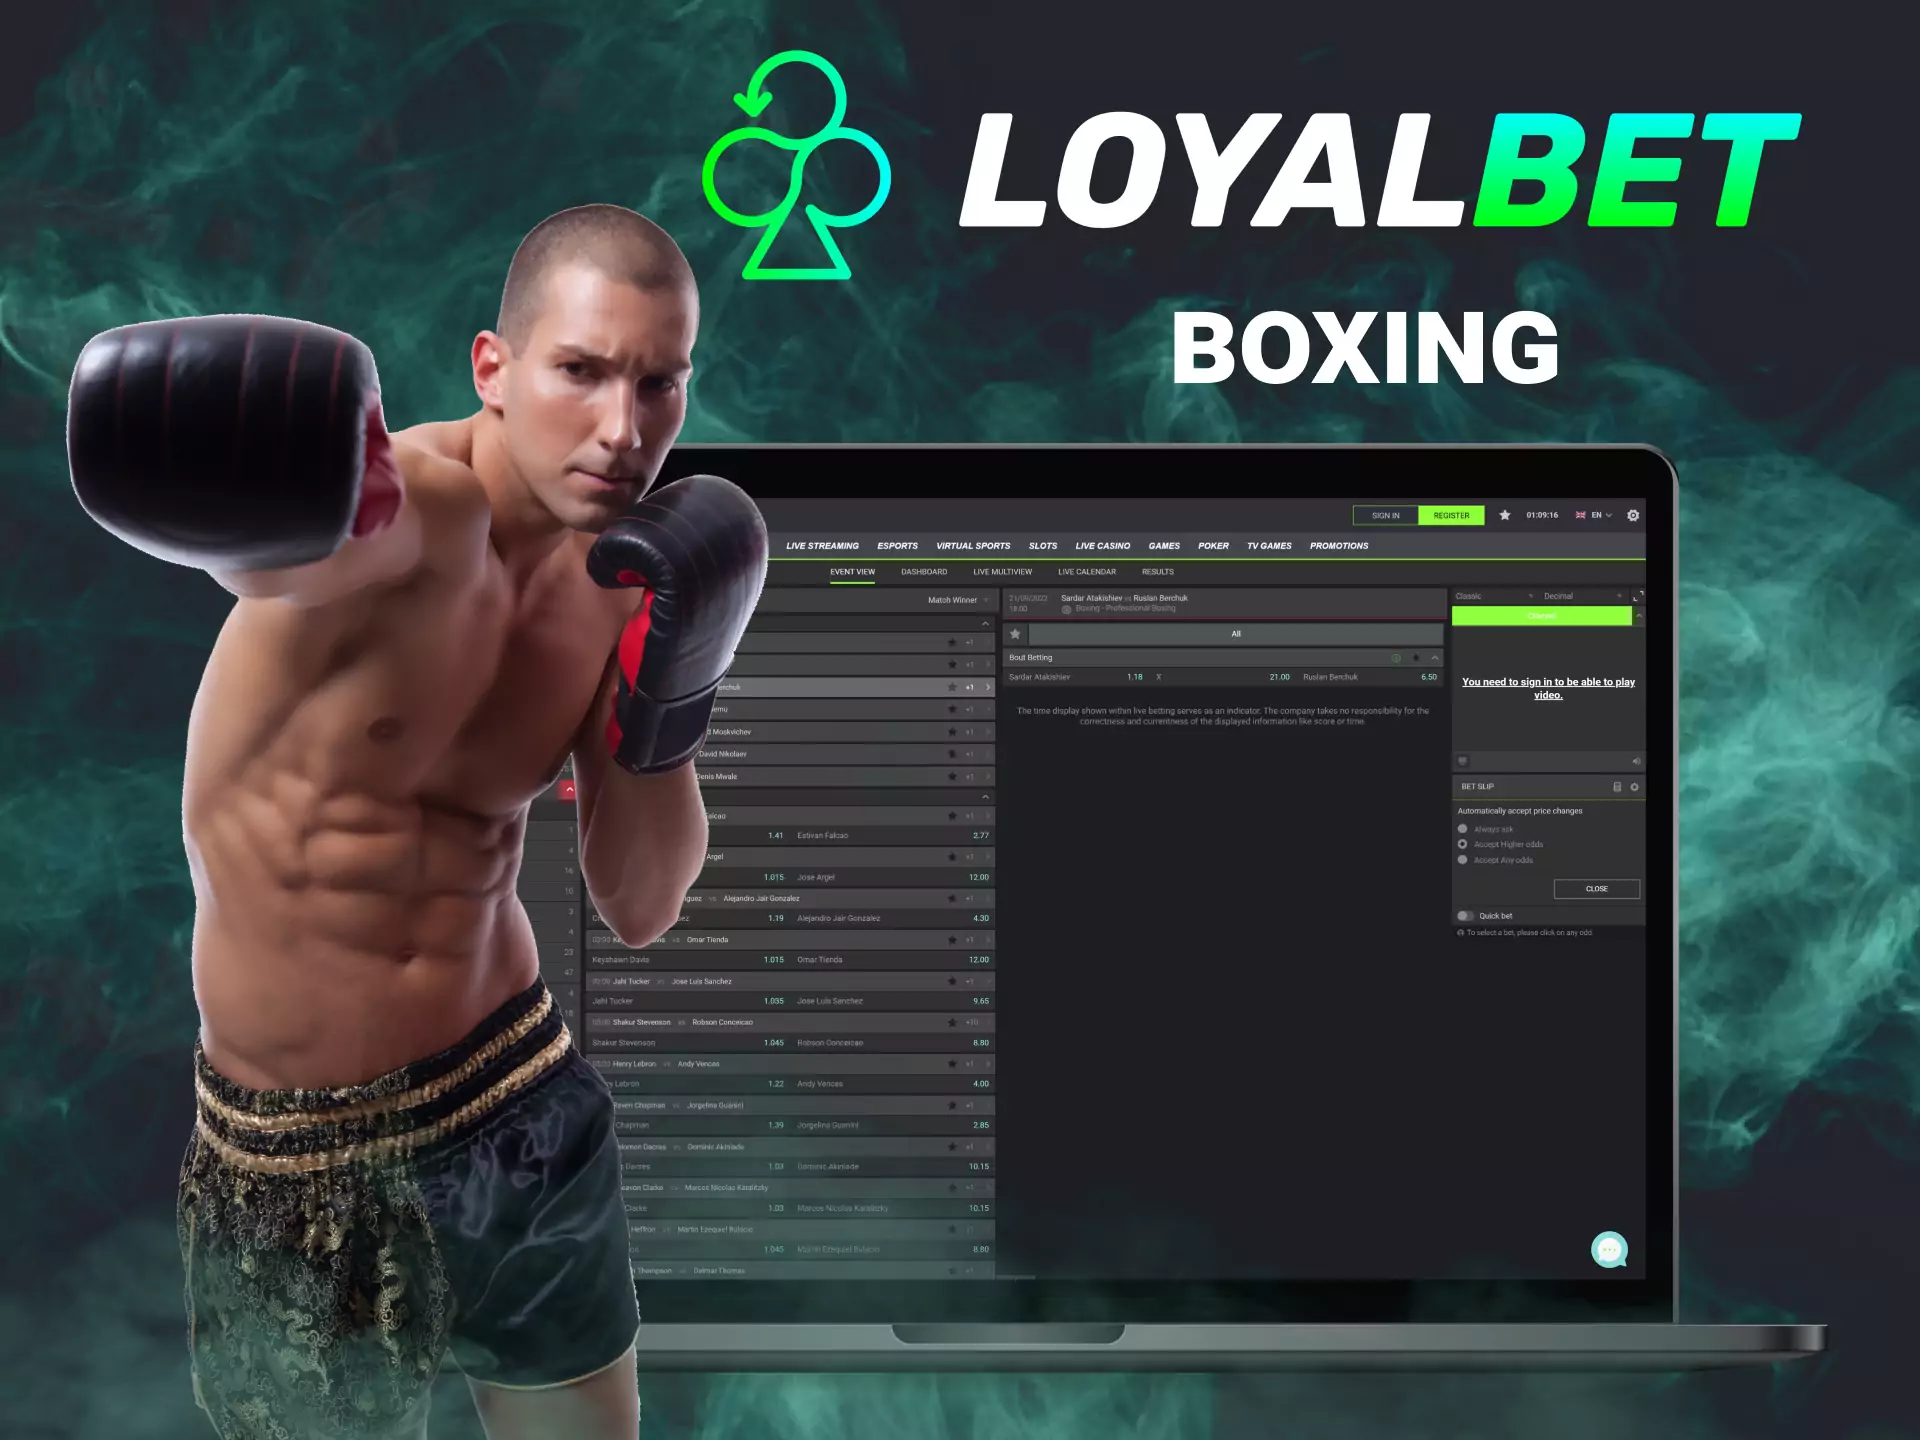 You can bet on boxing fights on the Loyalbet website.